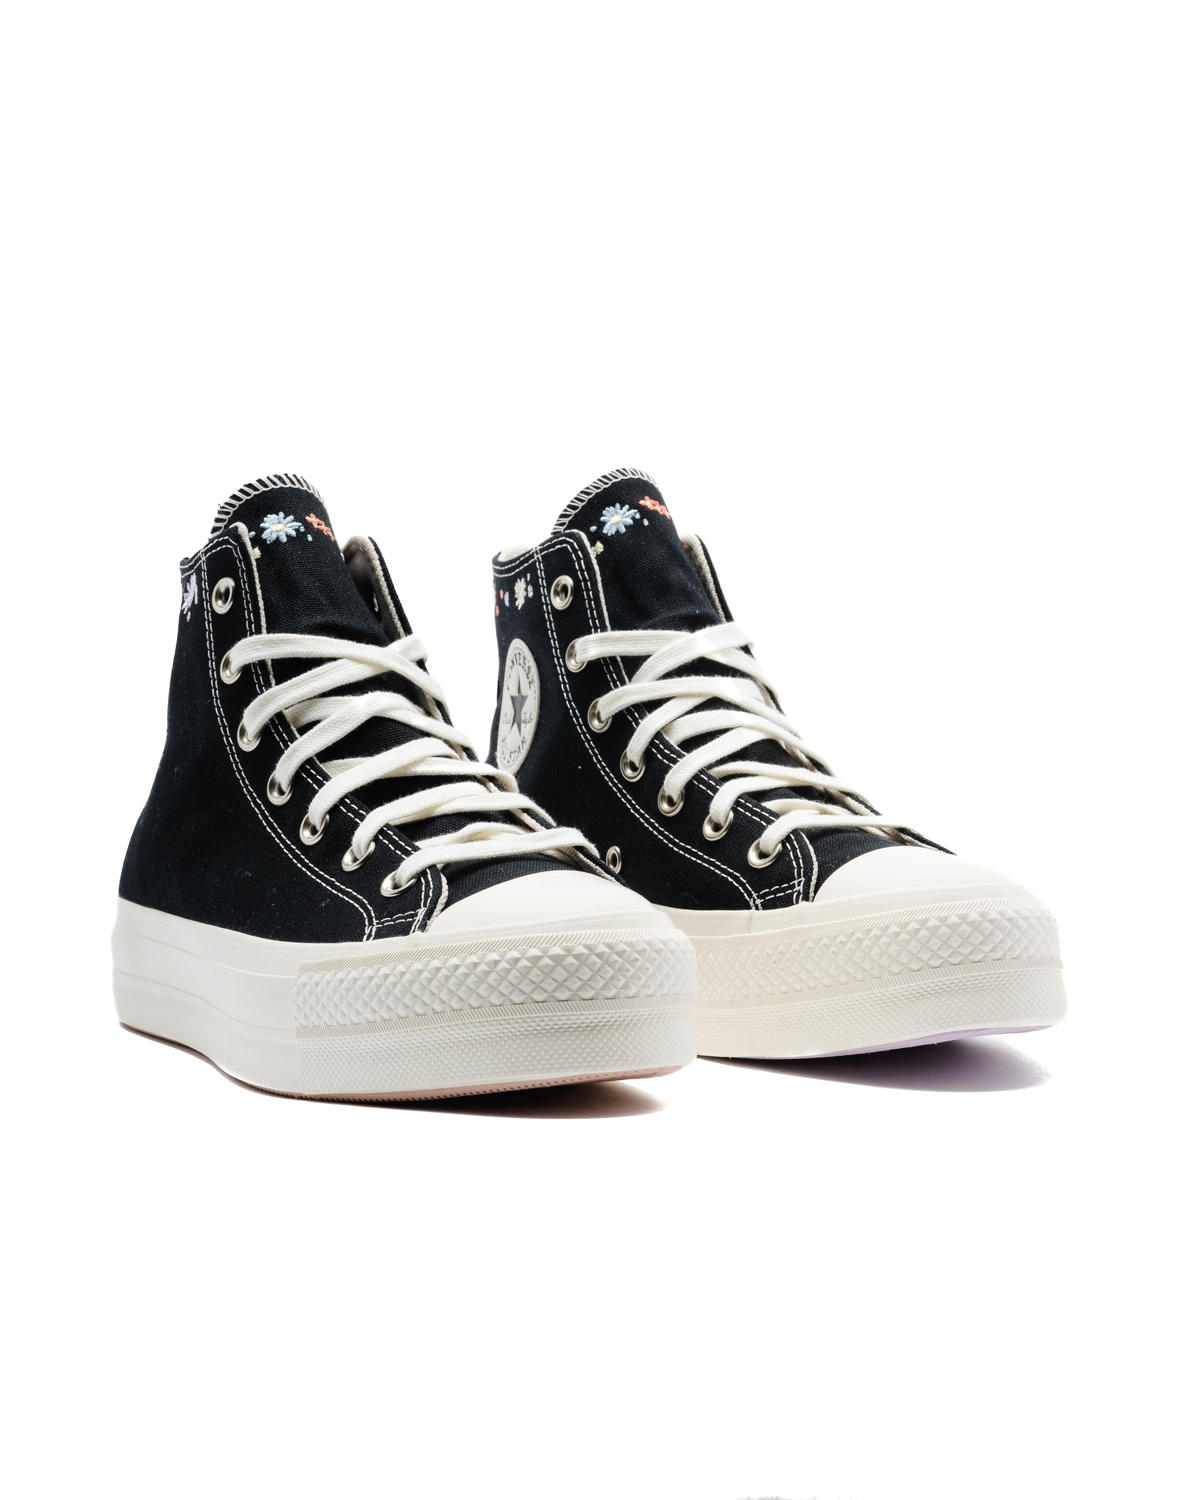 CarnejovenShops STORE | A01592C | Converse Chuck Taylor All Stars LIFT HIGH  | the most luxe looking sneakers available at converse right now